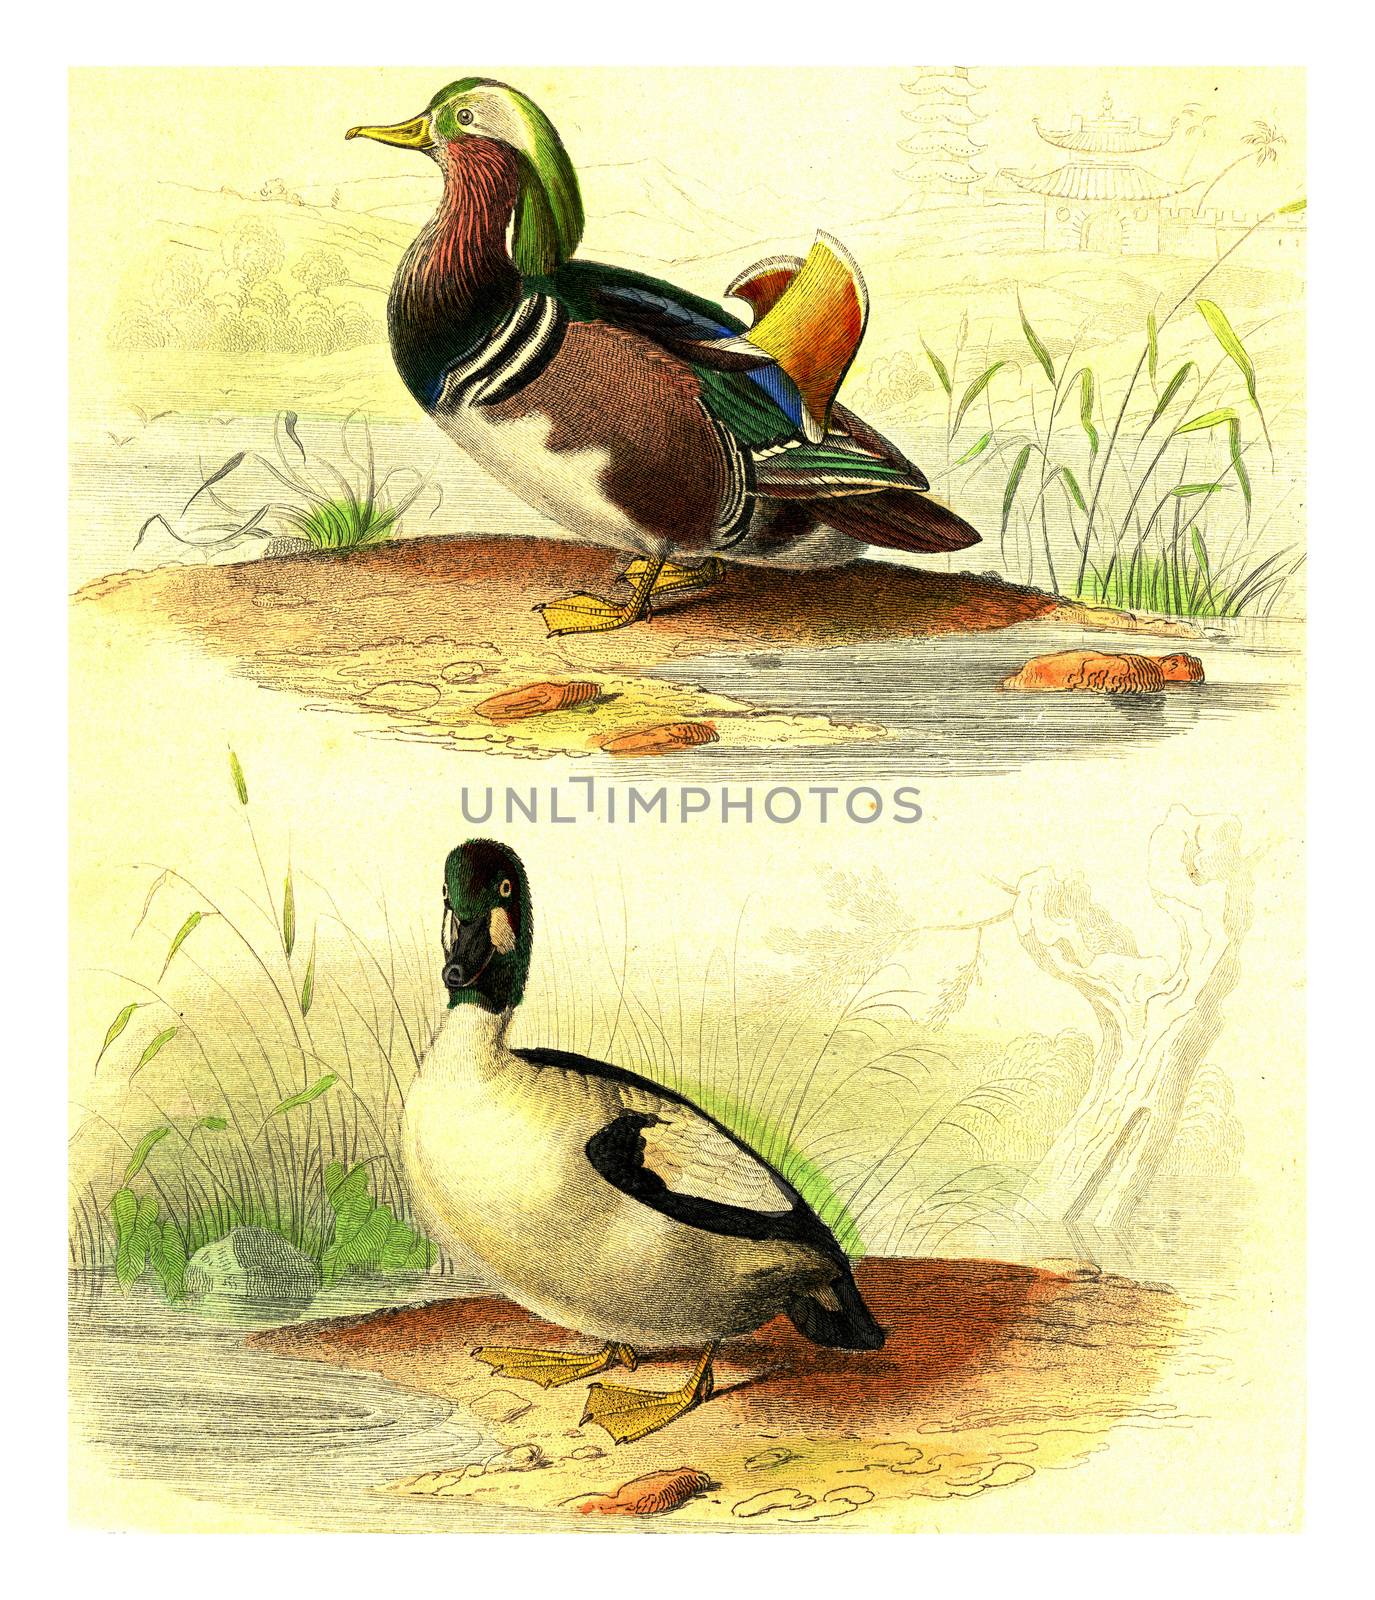 Duck range of China, The Barrow, vintage engraved illustration. From Buffon Complete Work.
